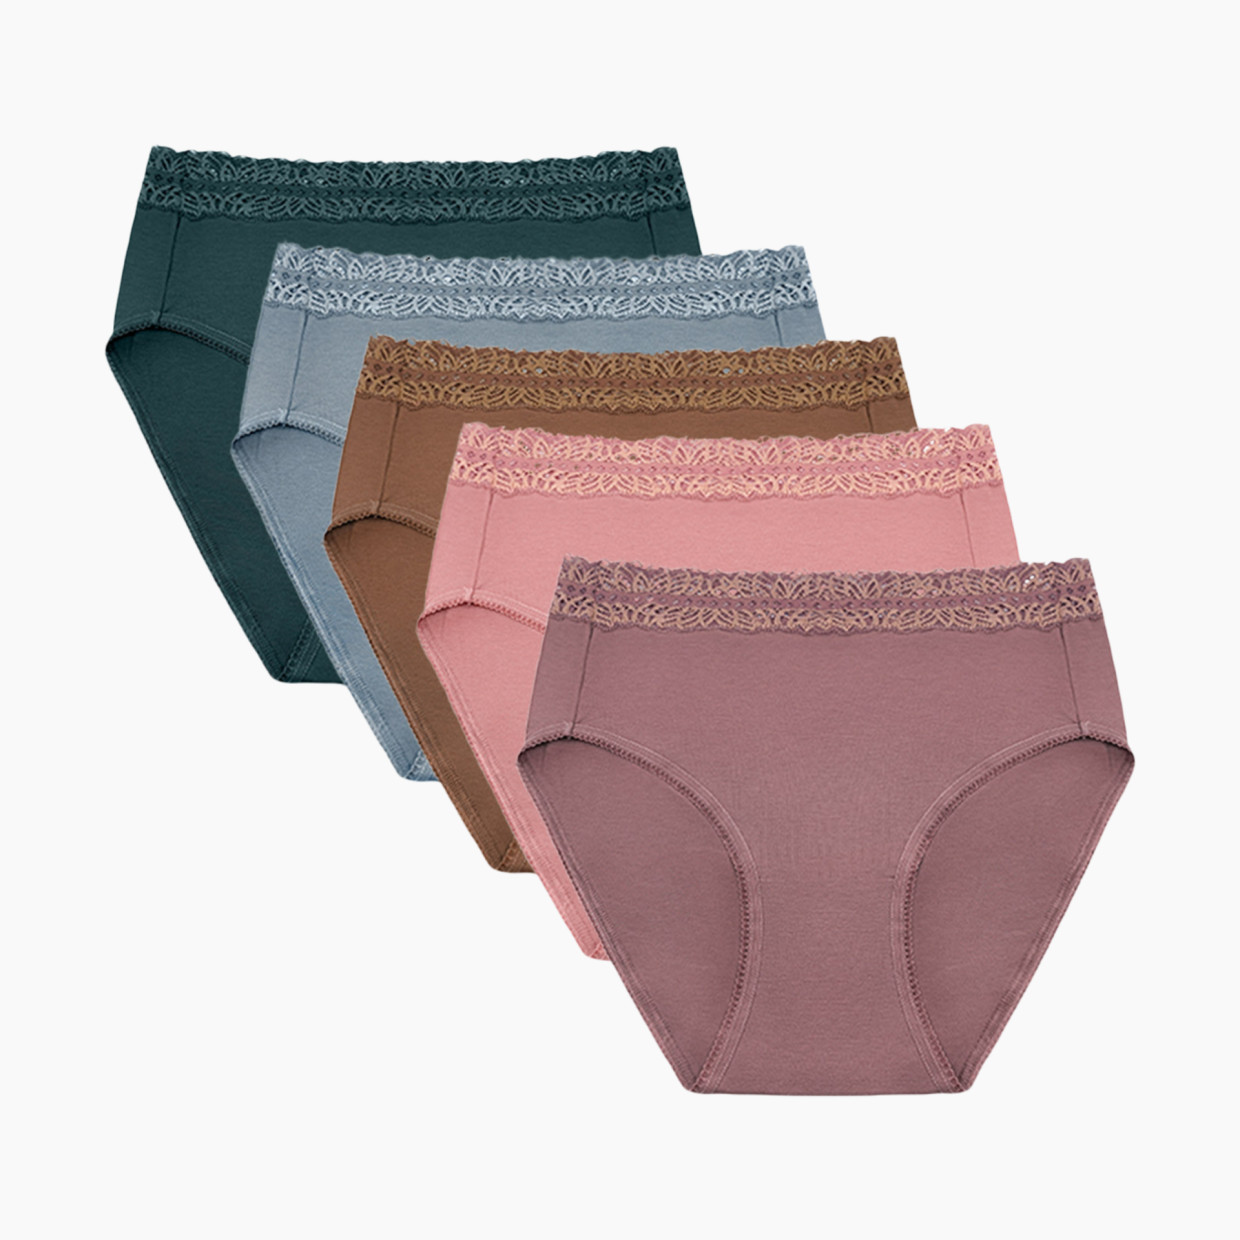 Kindred Bravely High Waist Postpartum Underwear & C-Section Recovery Maternity Panties (5 Pack) - Dusty Hues, Small.